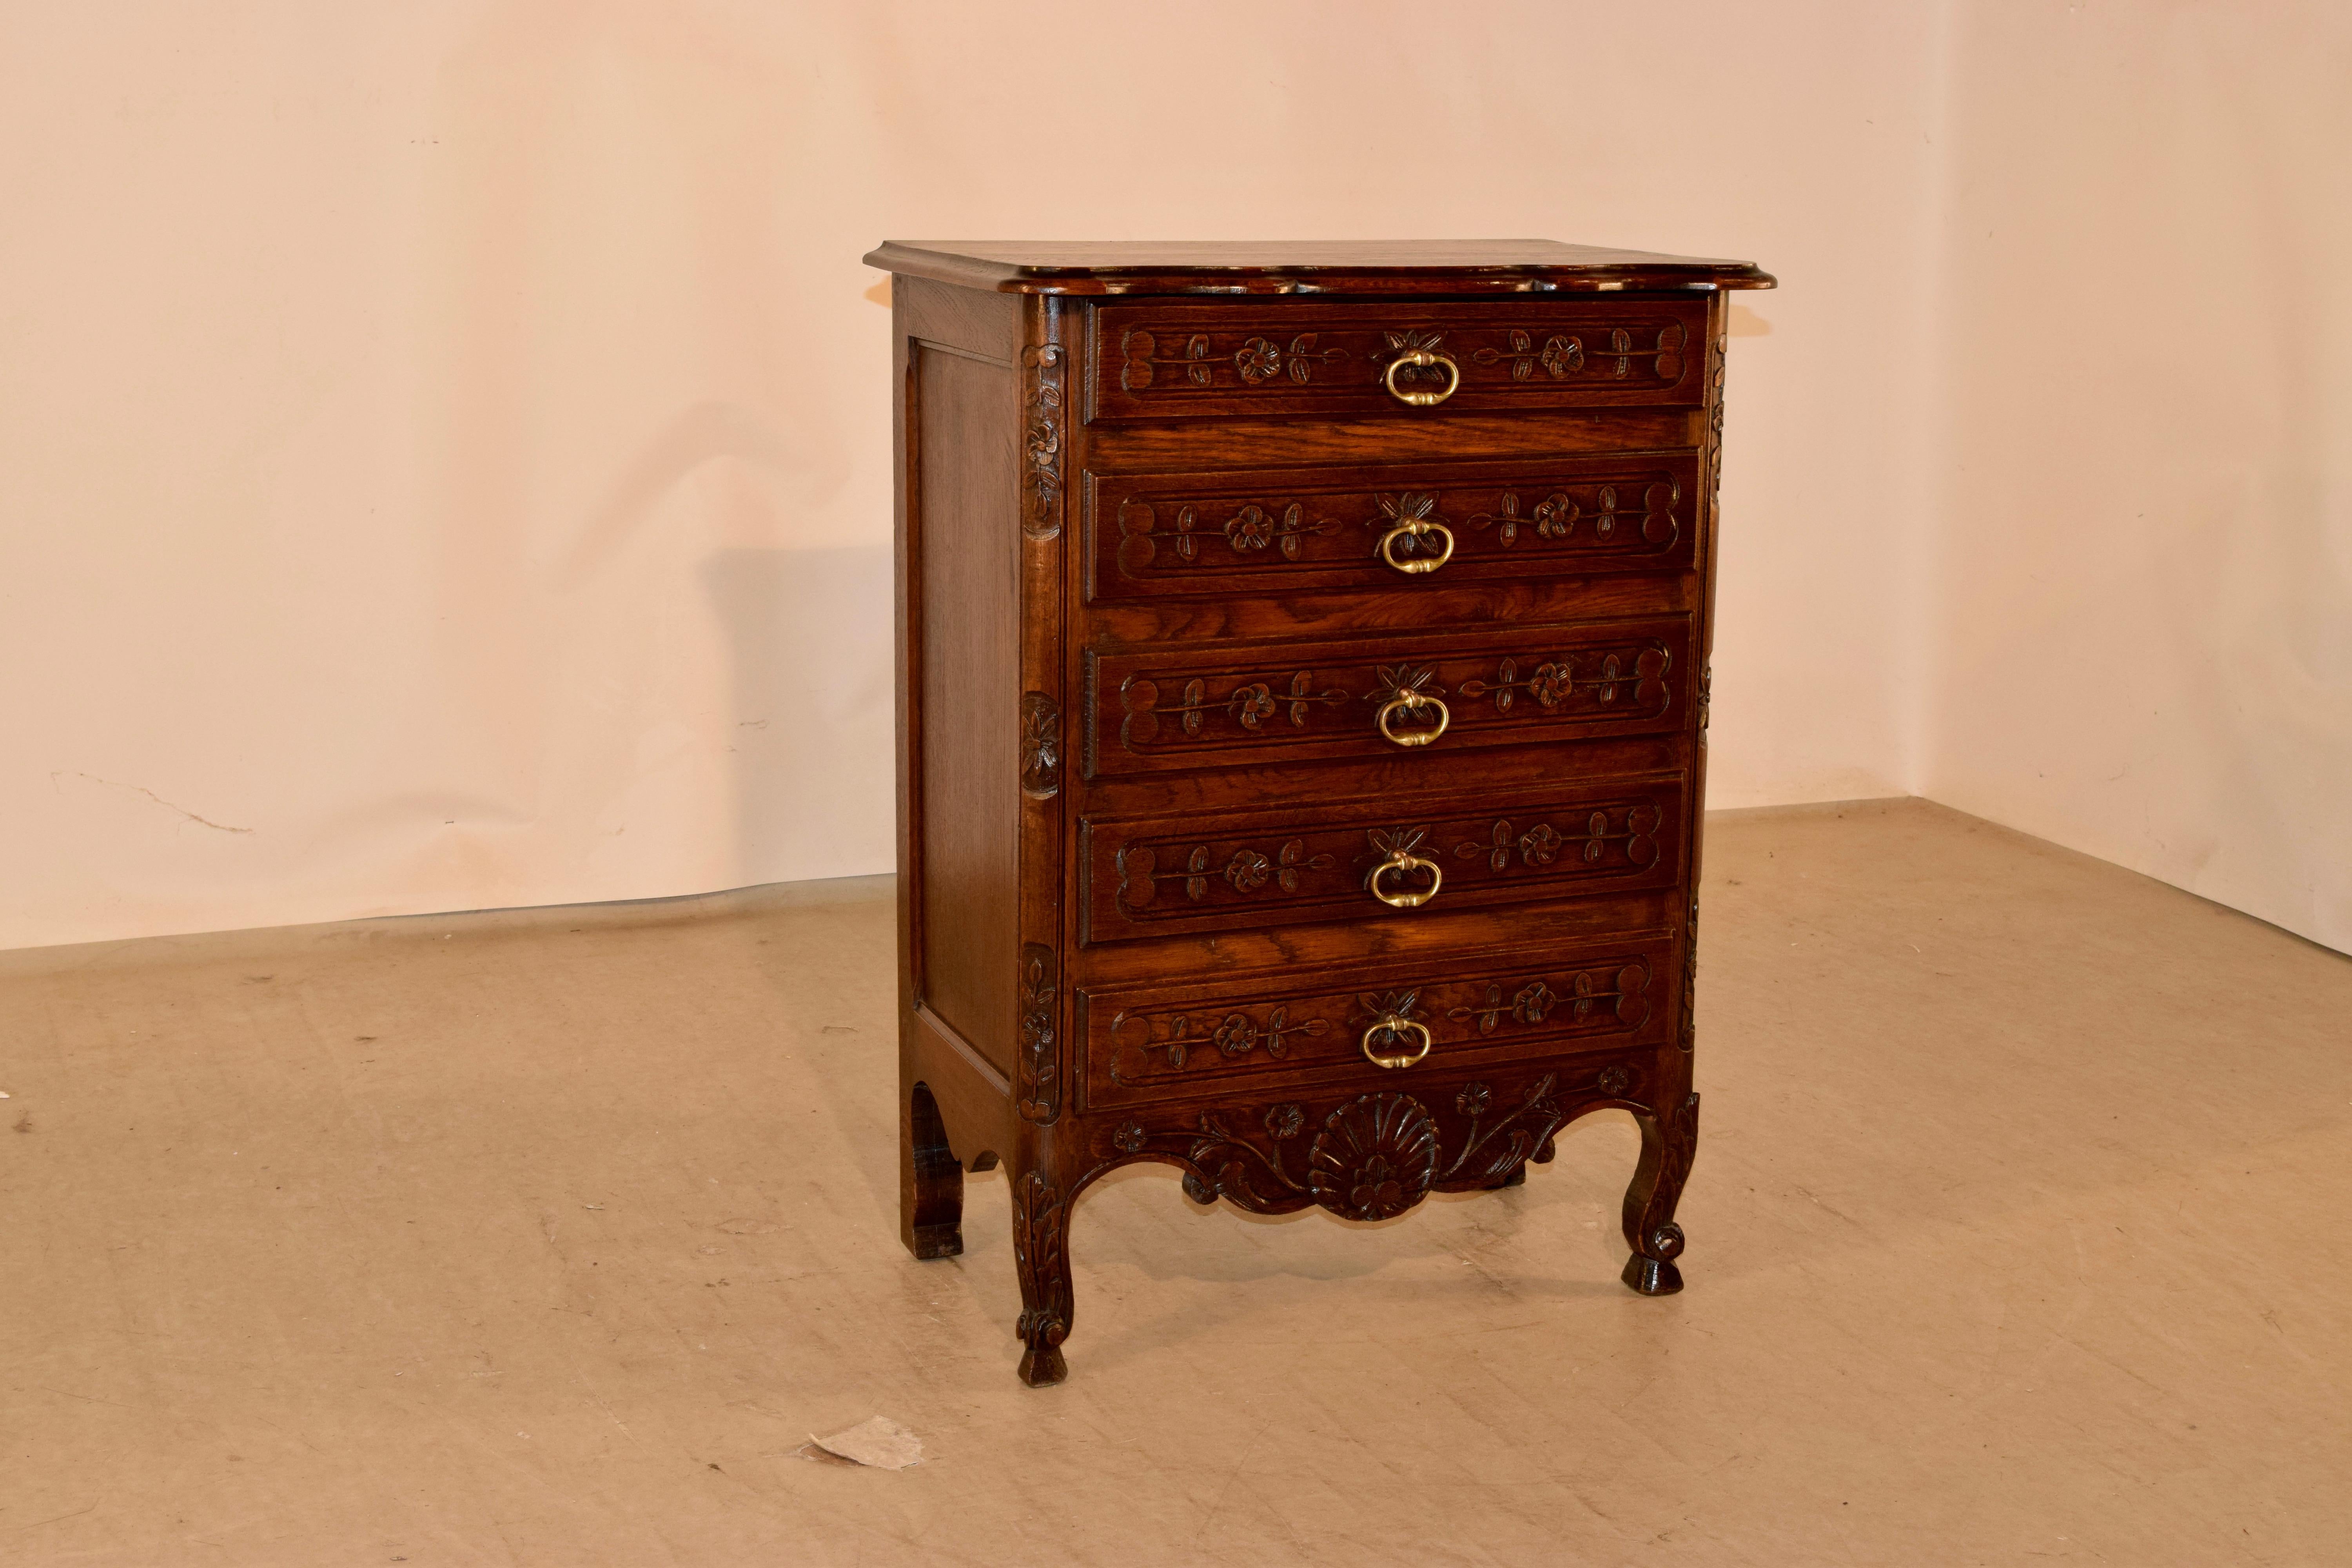 19th century single oak chest of drawers from France. The top is scalloped and has a beveled edge, following down to paneled sides and five drawers in the front, all with carved panels. The drawers are flanked by carved quarter columns. The case is